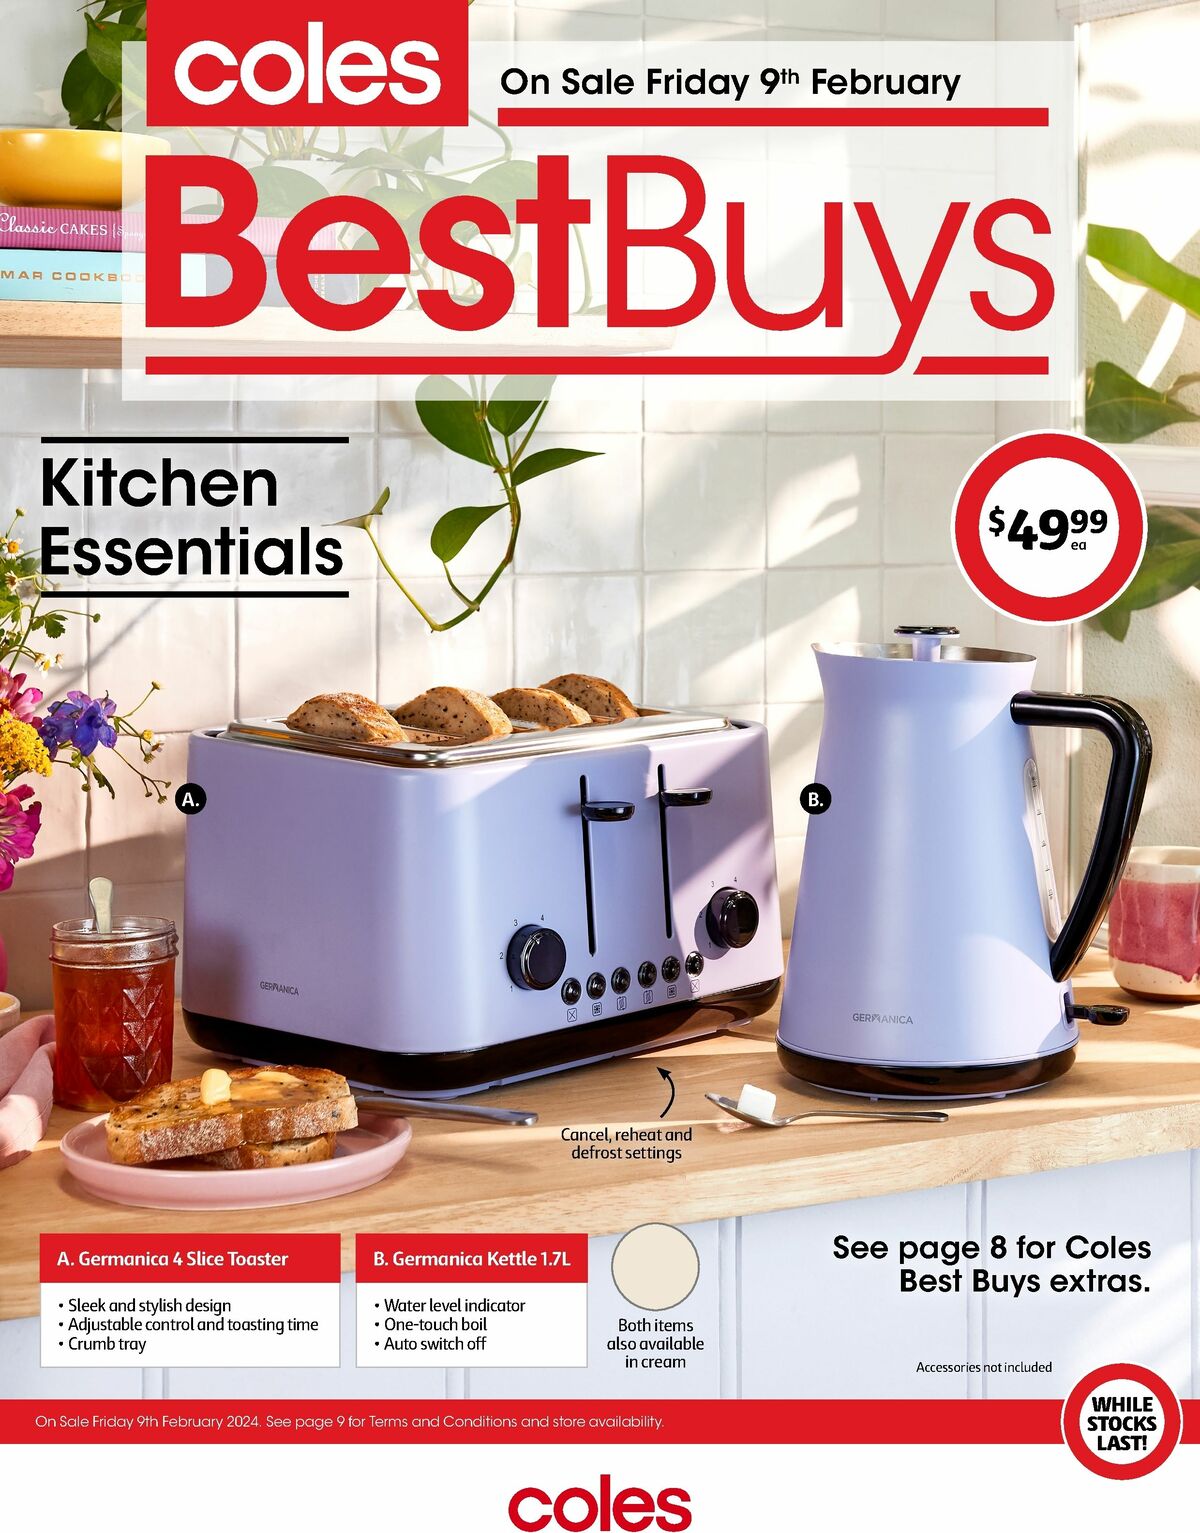 Coles Best Buys - Kitchen Essentials Catalogues from 9 February